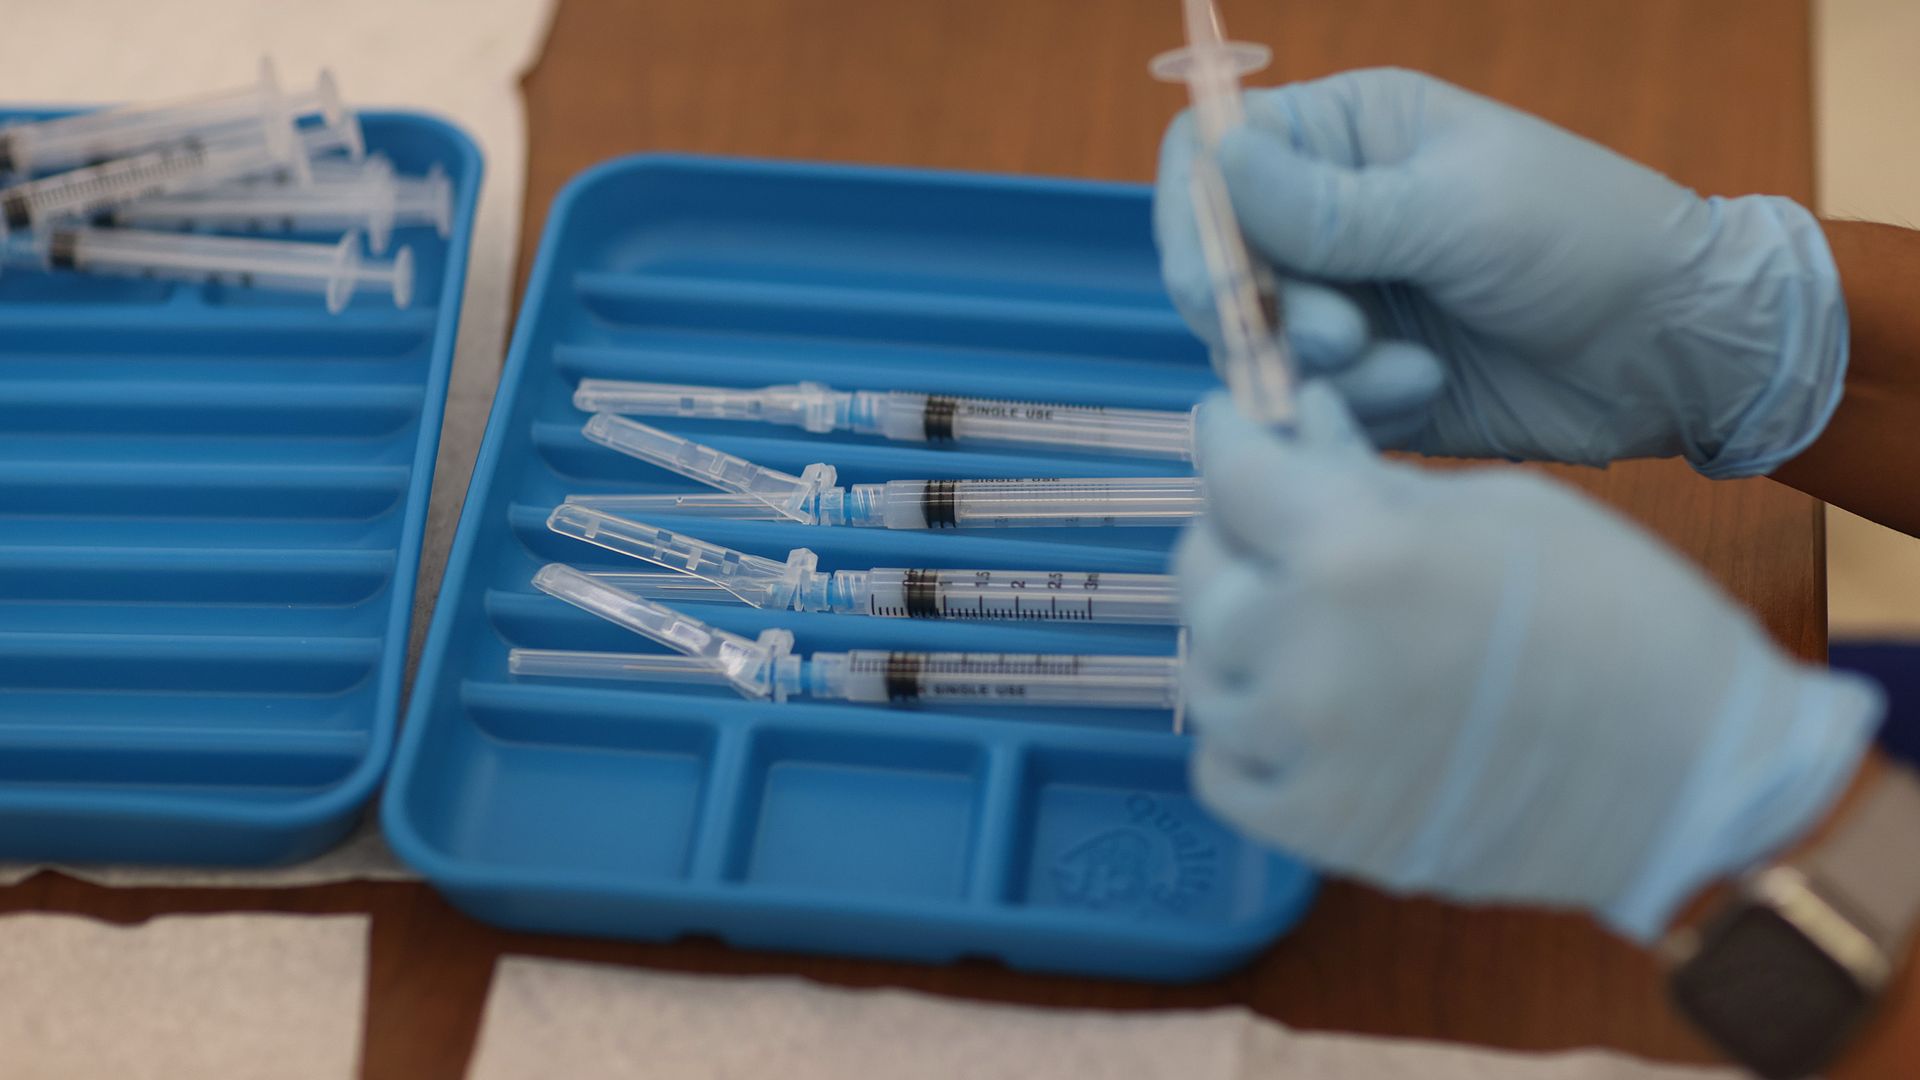 Picture of syringes in a blue plastic container